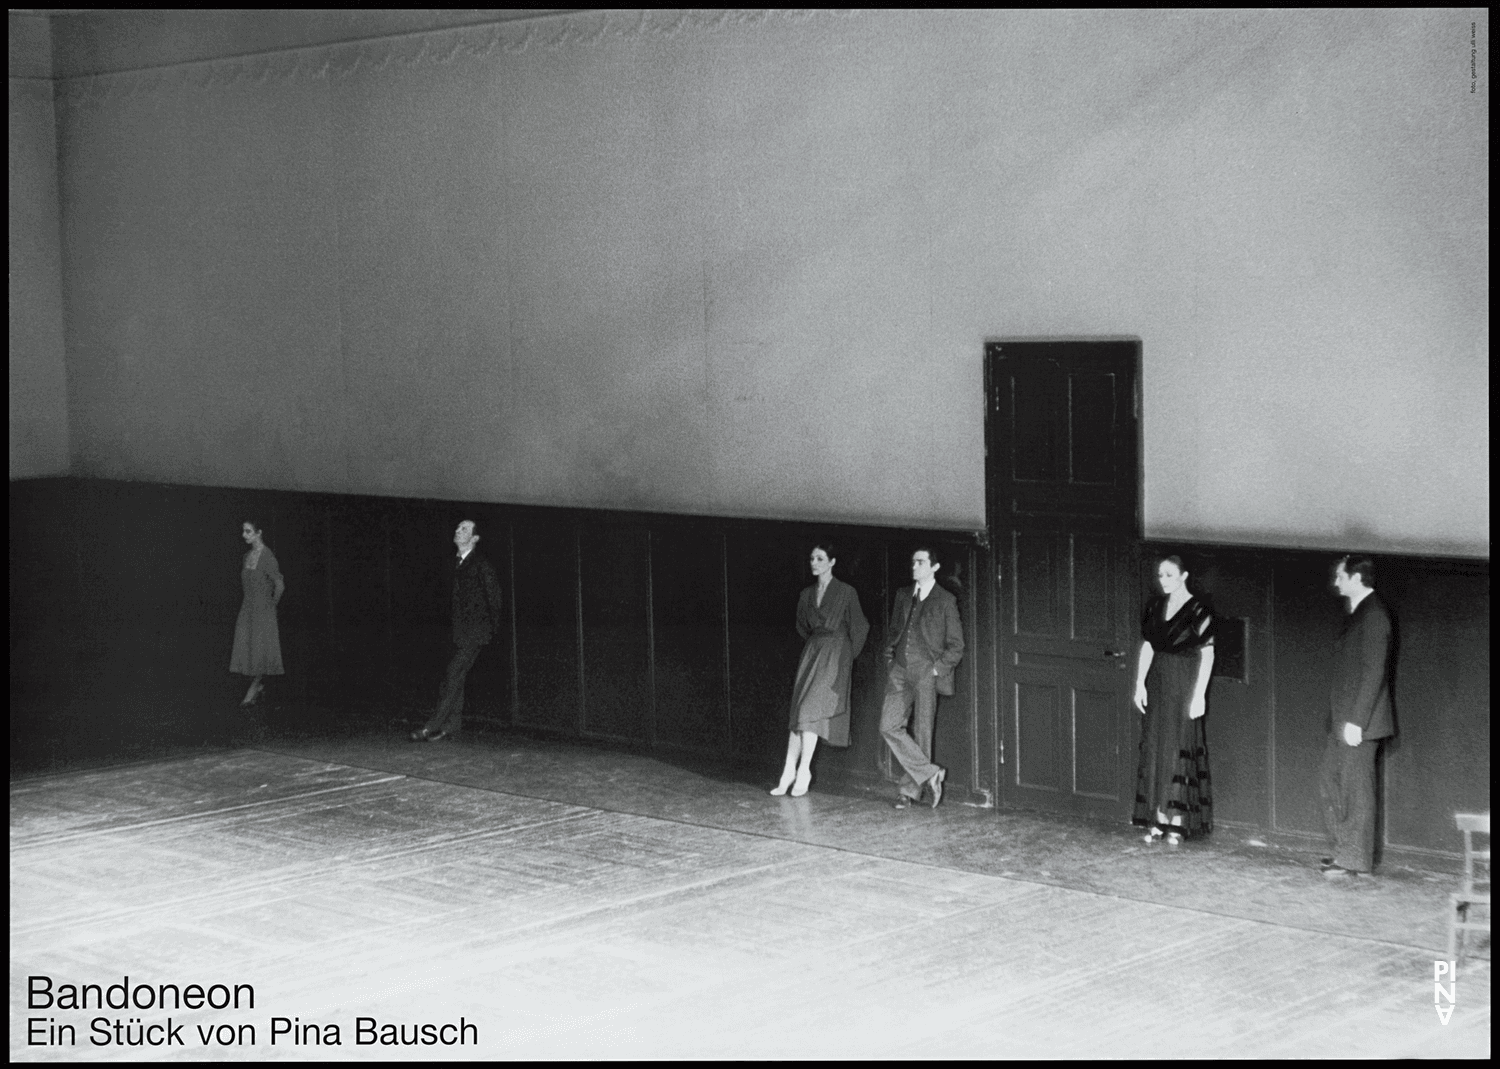 Poster for “Bandoneon” by Pina Bausch